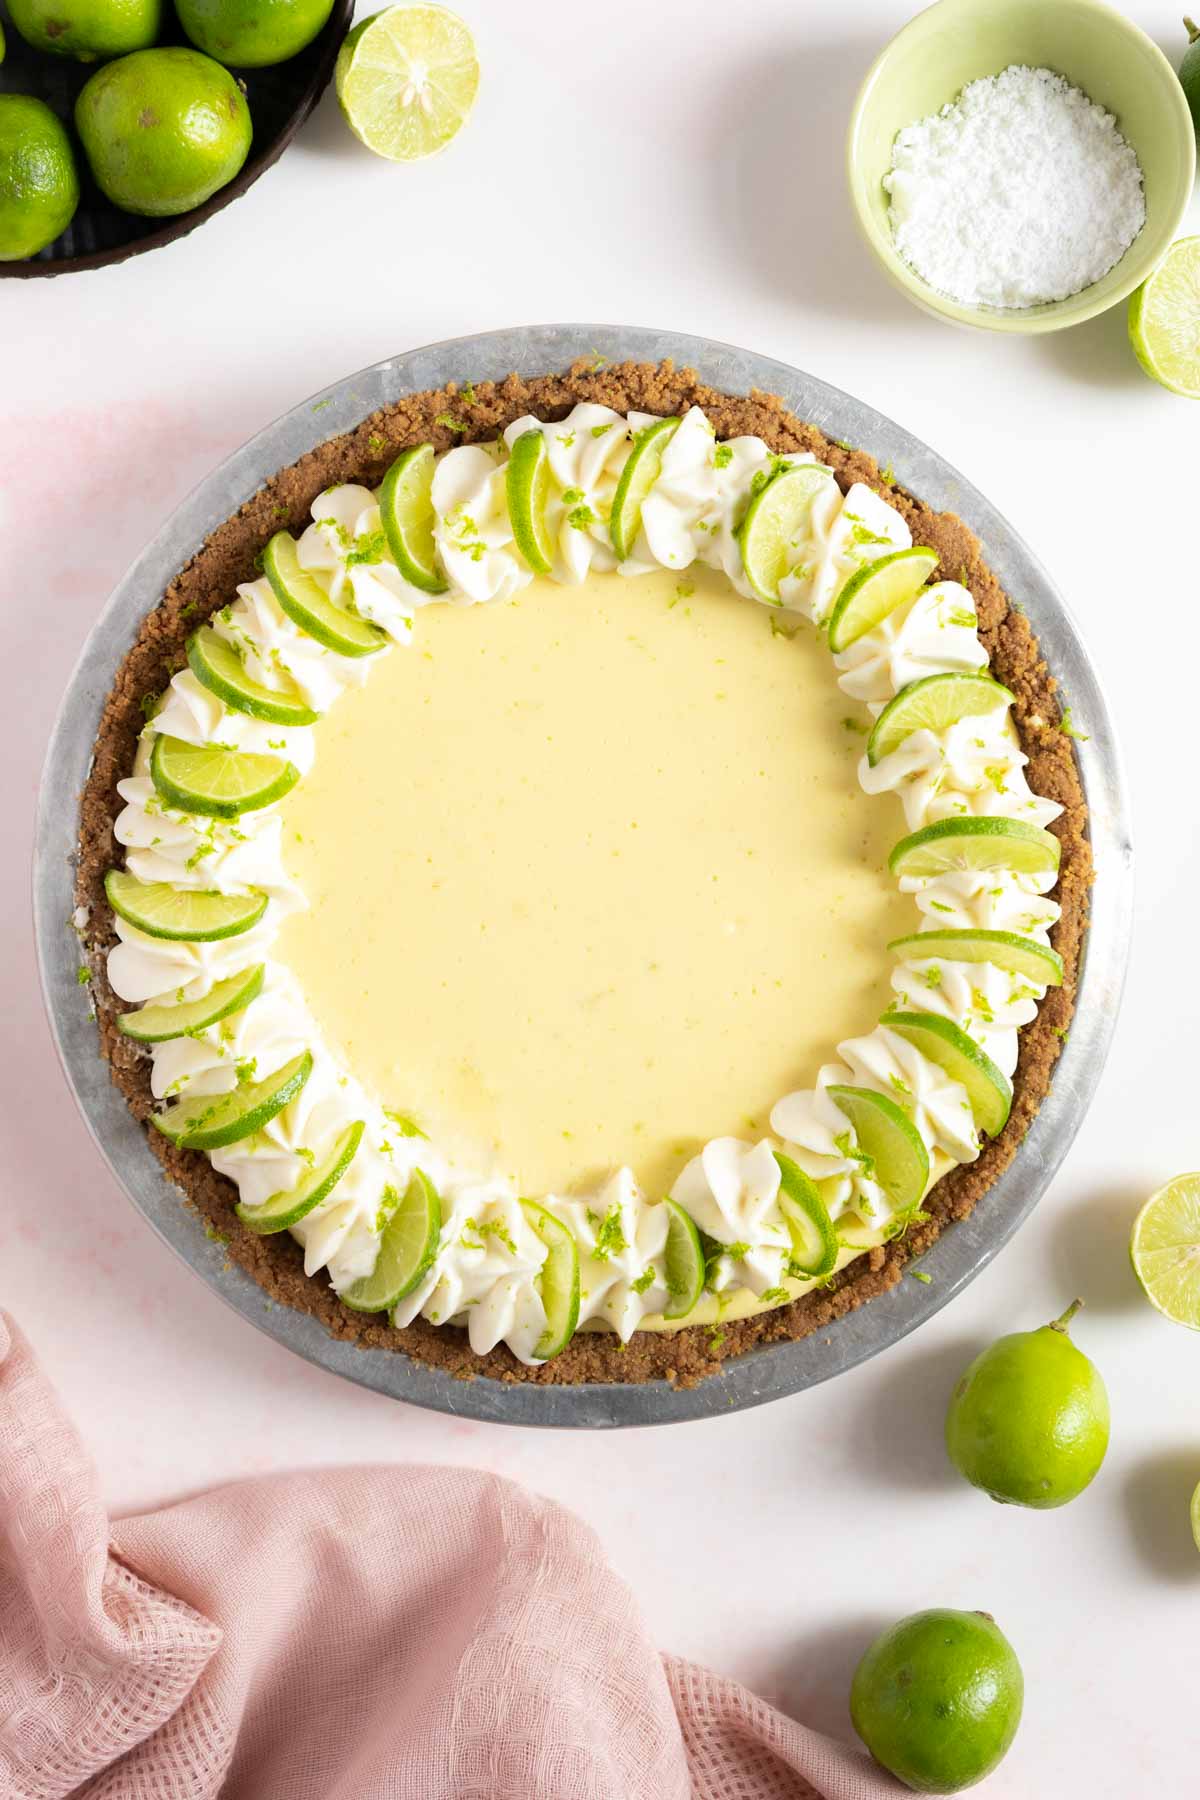 Key lime pie with whipped topping and lime slices.